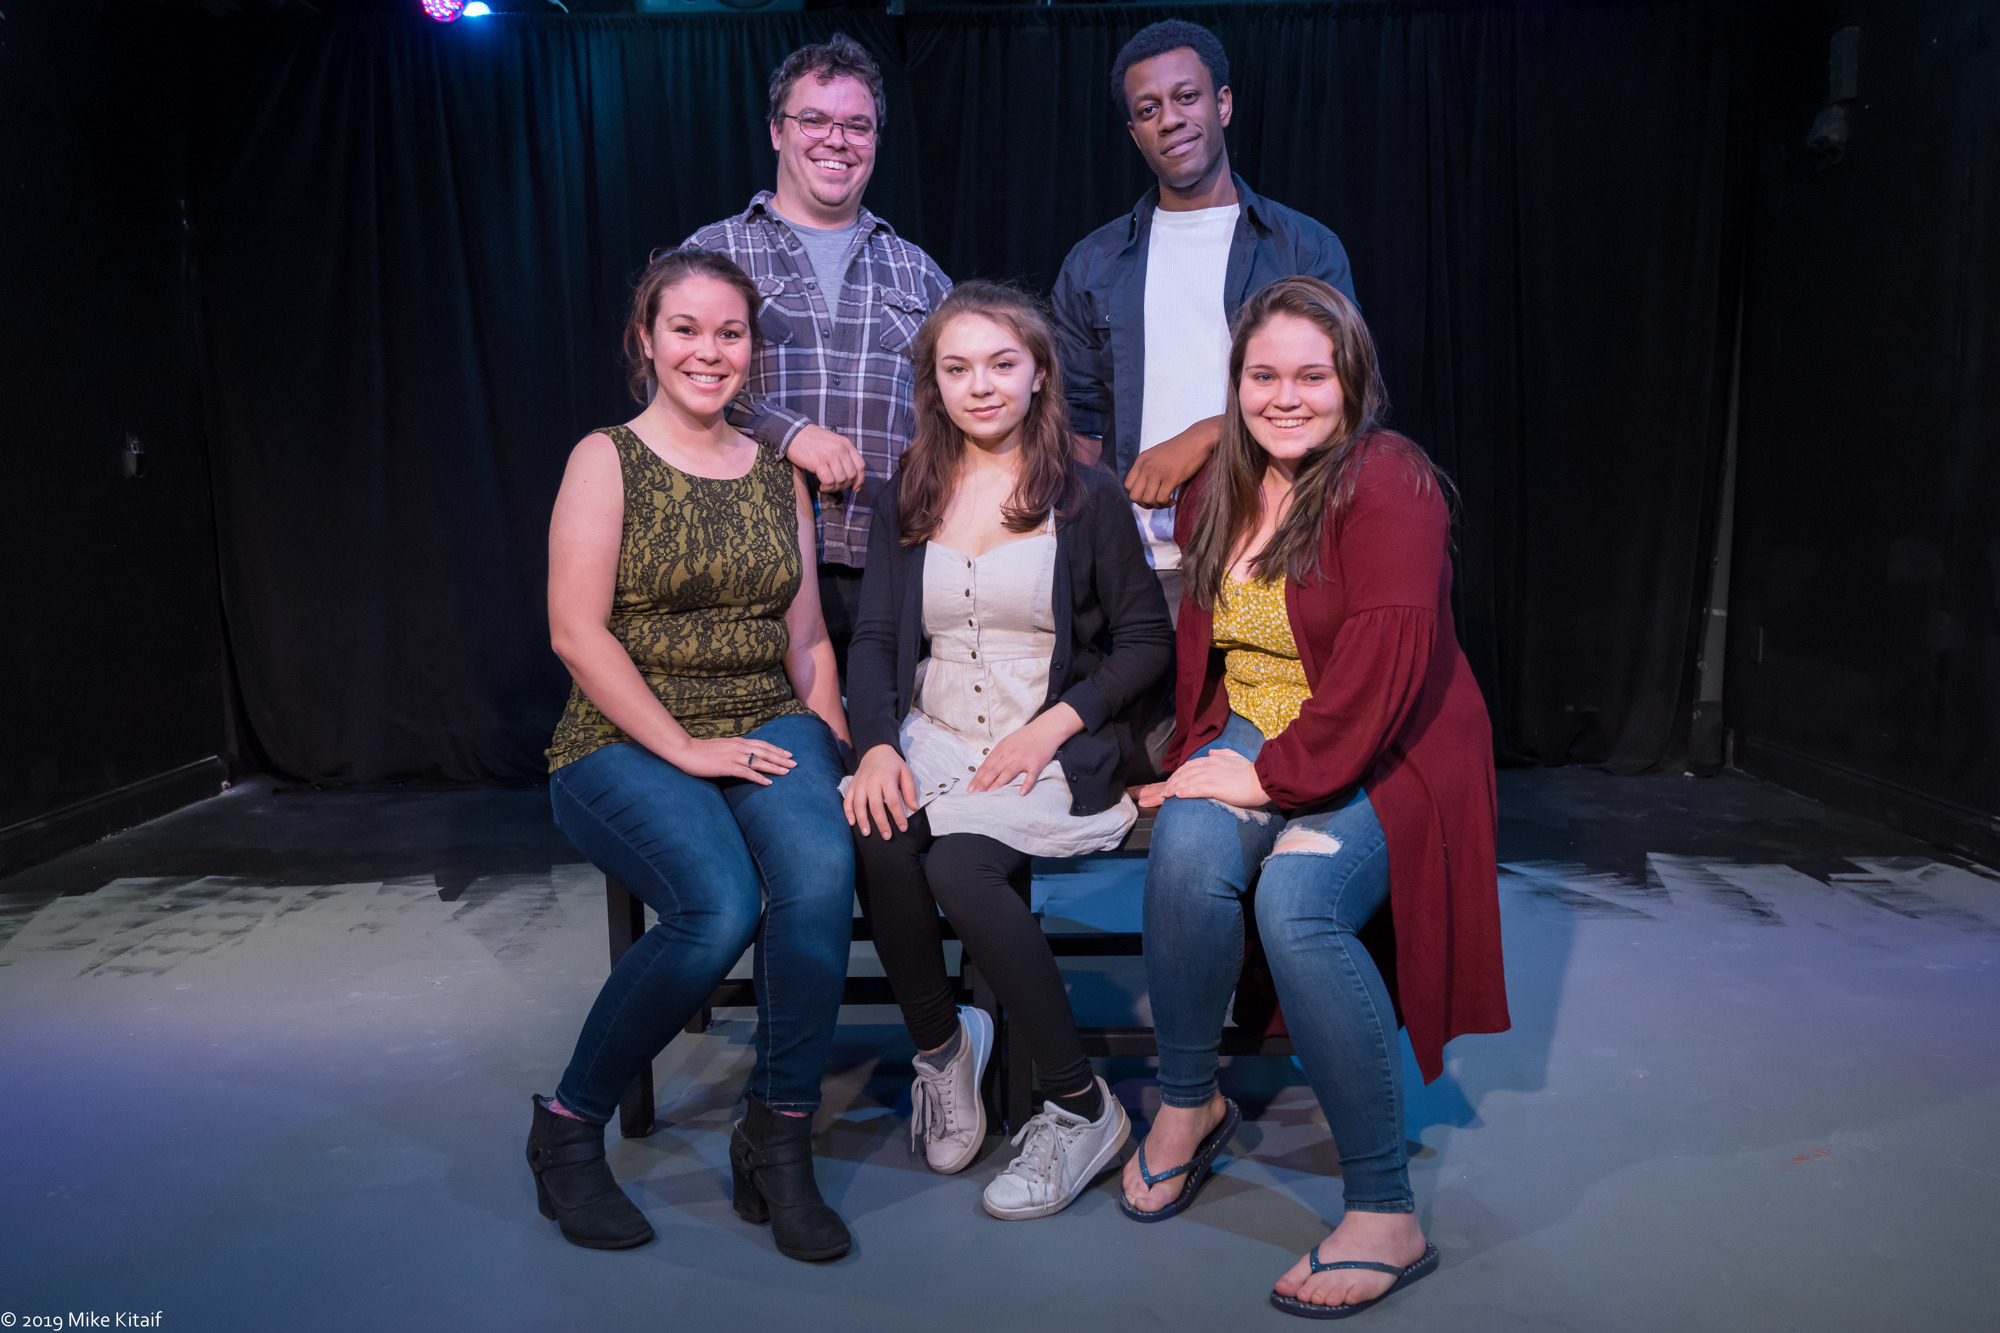 Stage manager Angela Young, director Beau Wade, actors Nikki Lynn and Brent Jordan and lighting technician Savanna Dacosta. Photo by Mike Kitaif